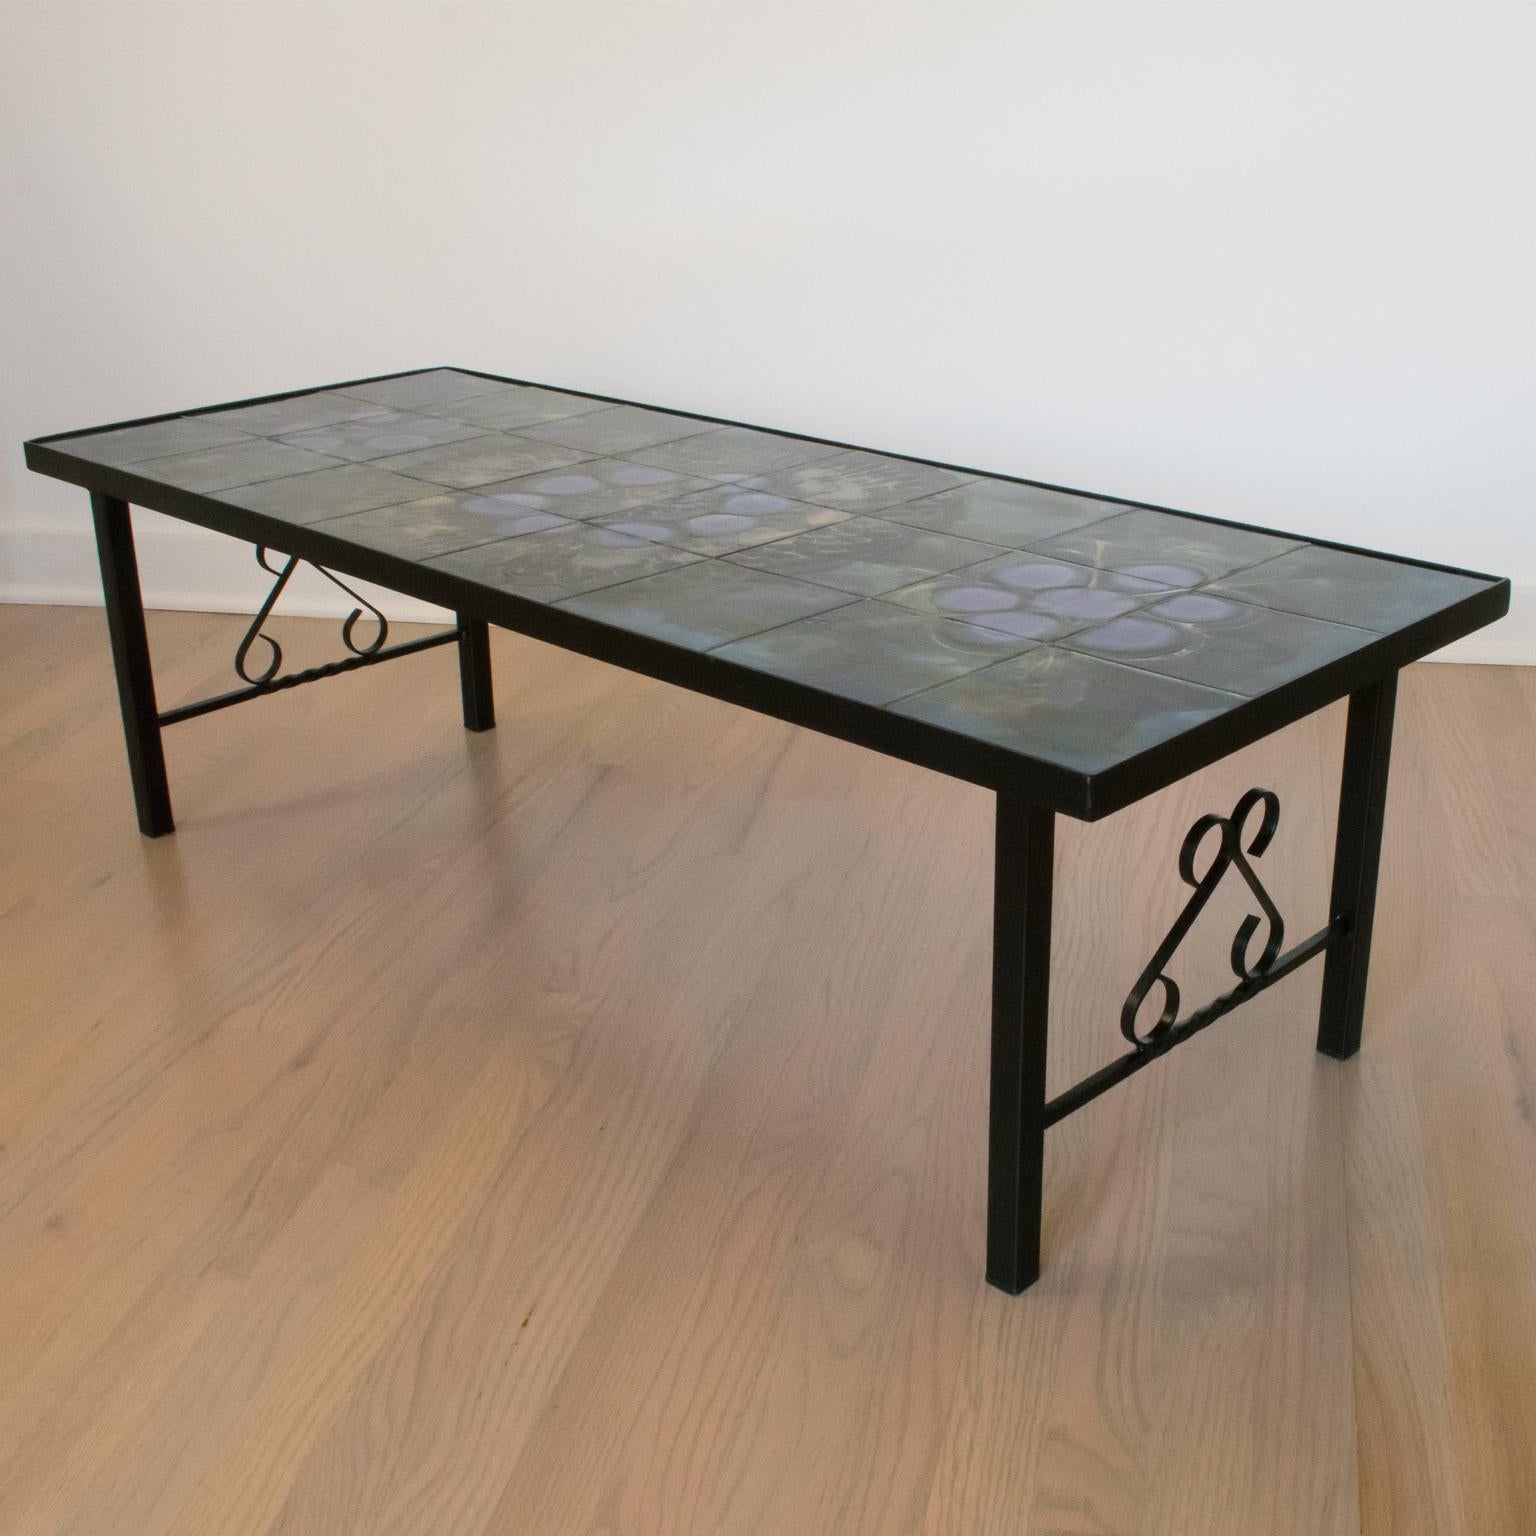 Belarti Wrought Iron Ceramic Tile Side Coffee Table, 1960s For Sale 2